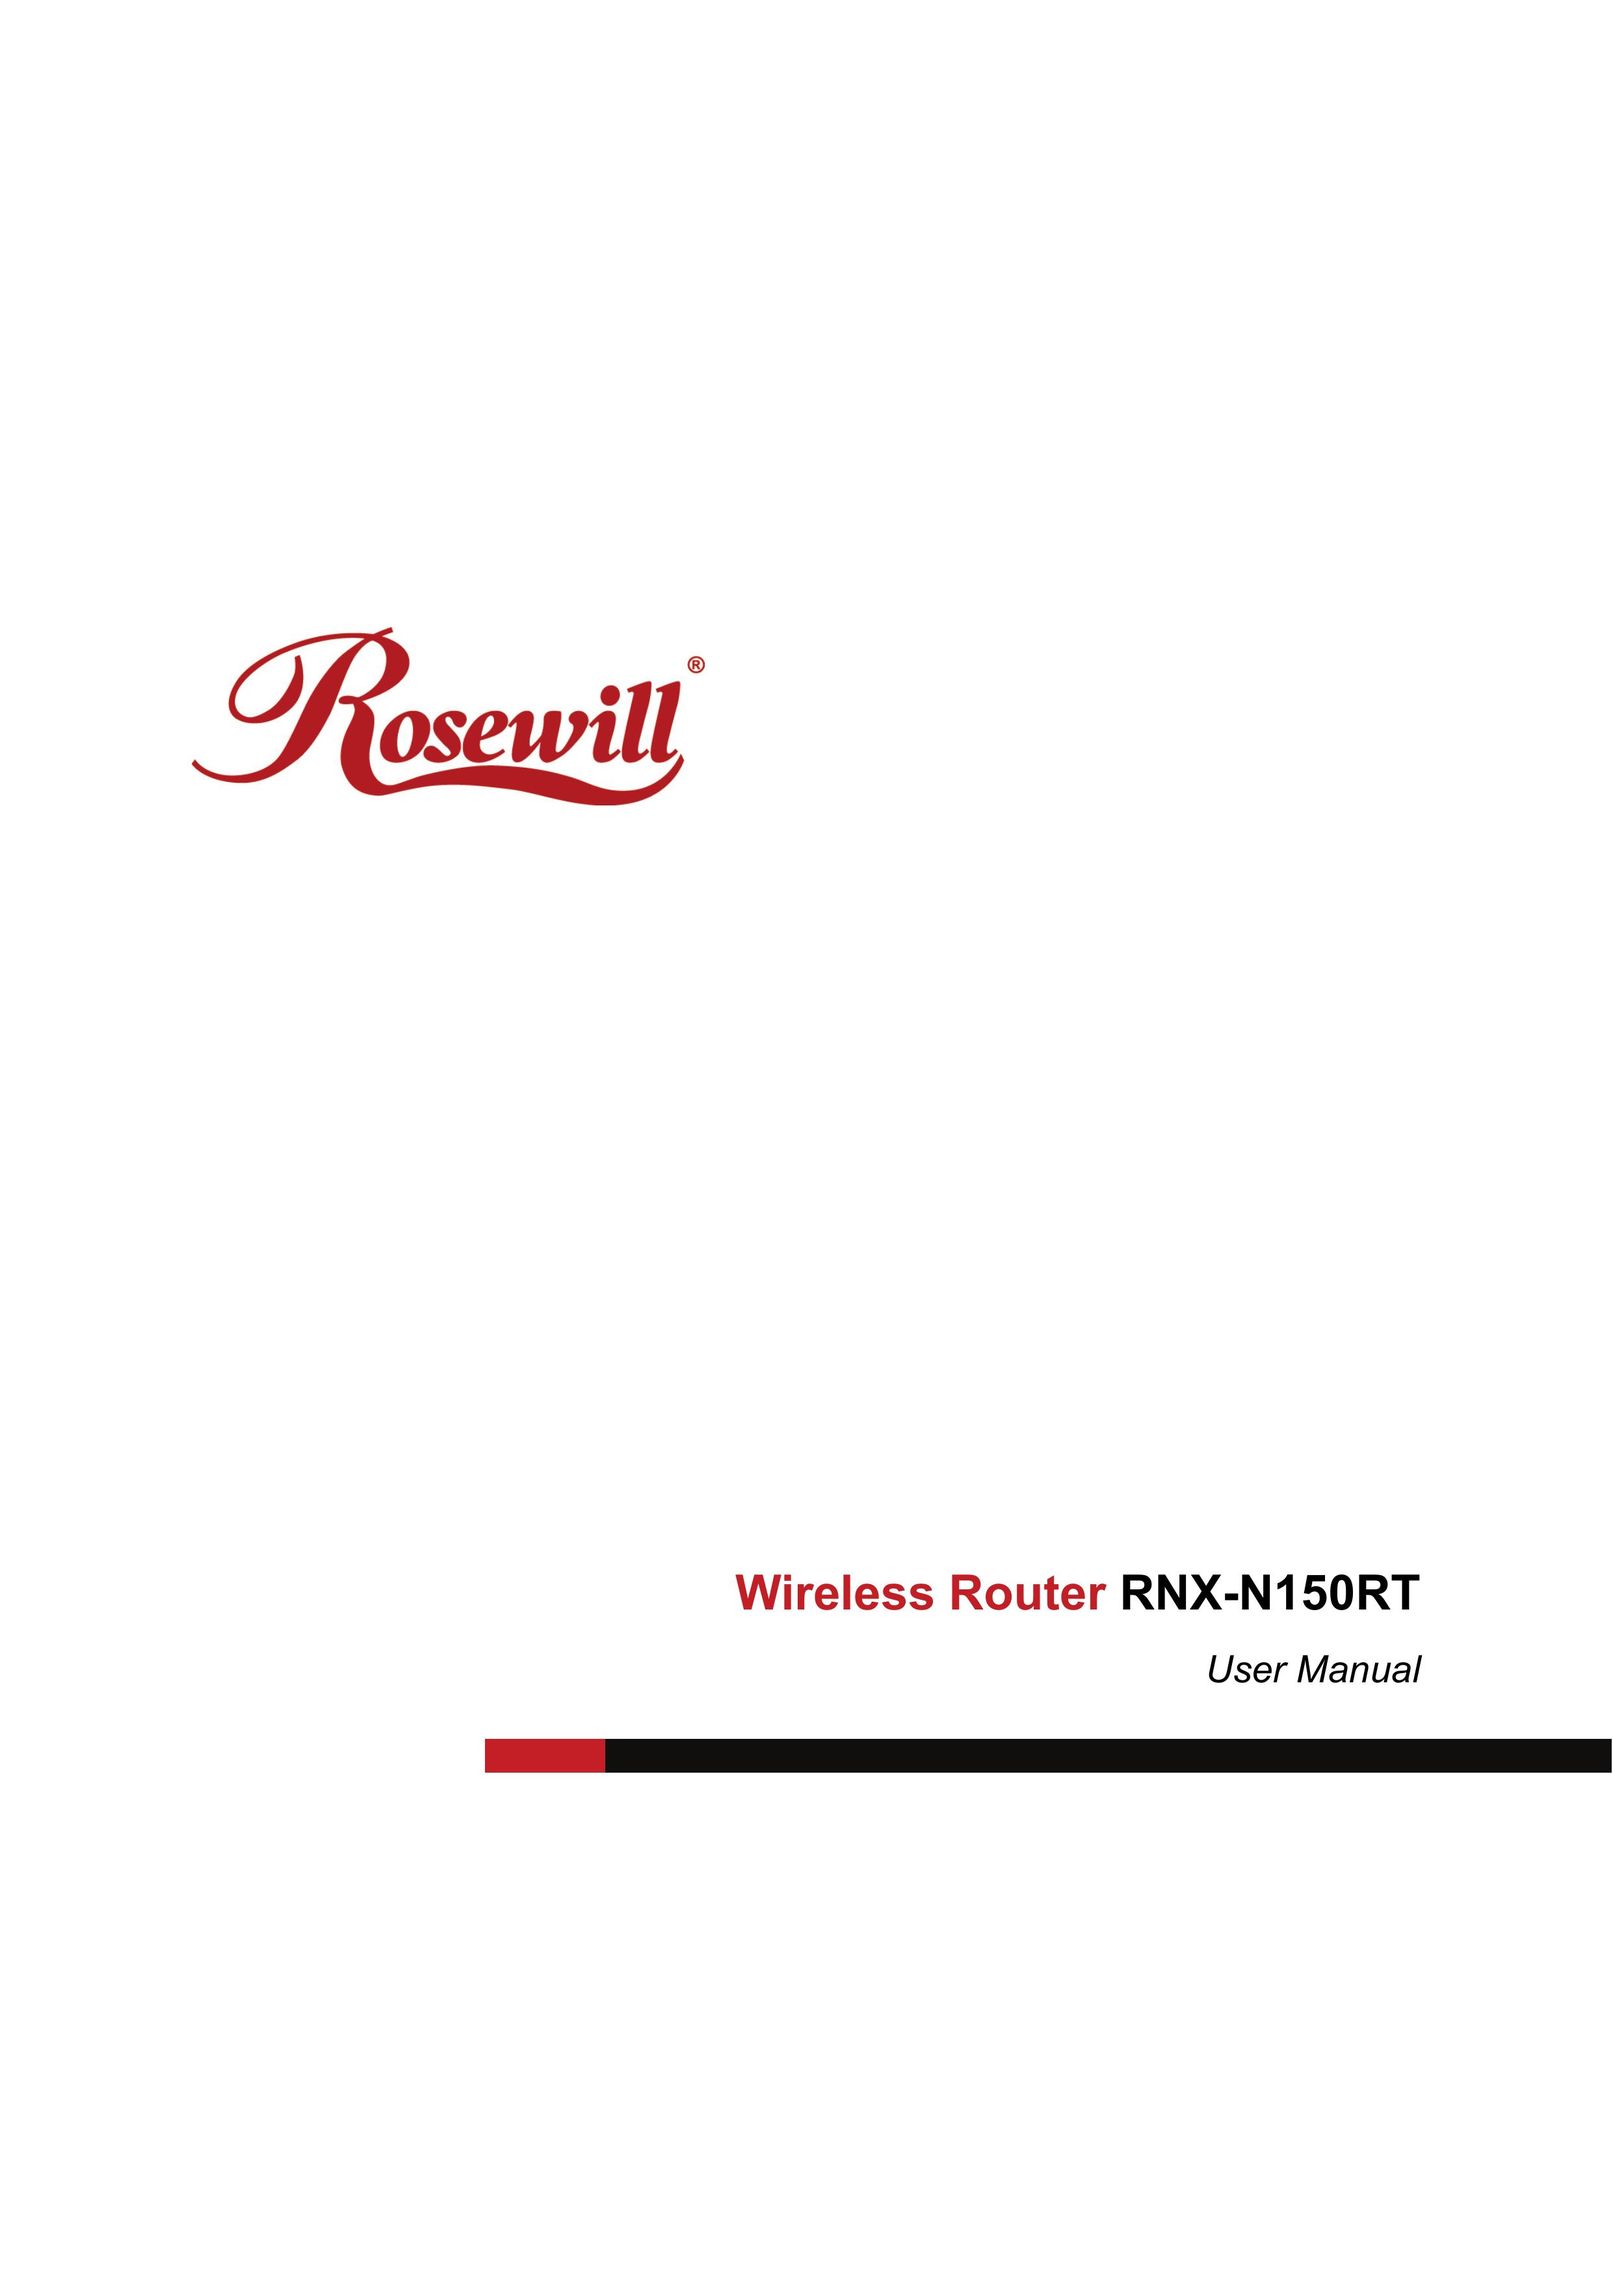 Rosewill RNX-N150RT Network Router User Manual